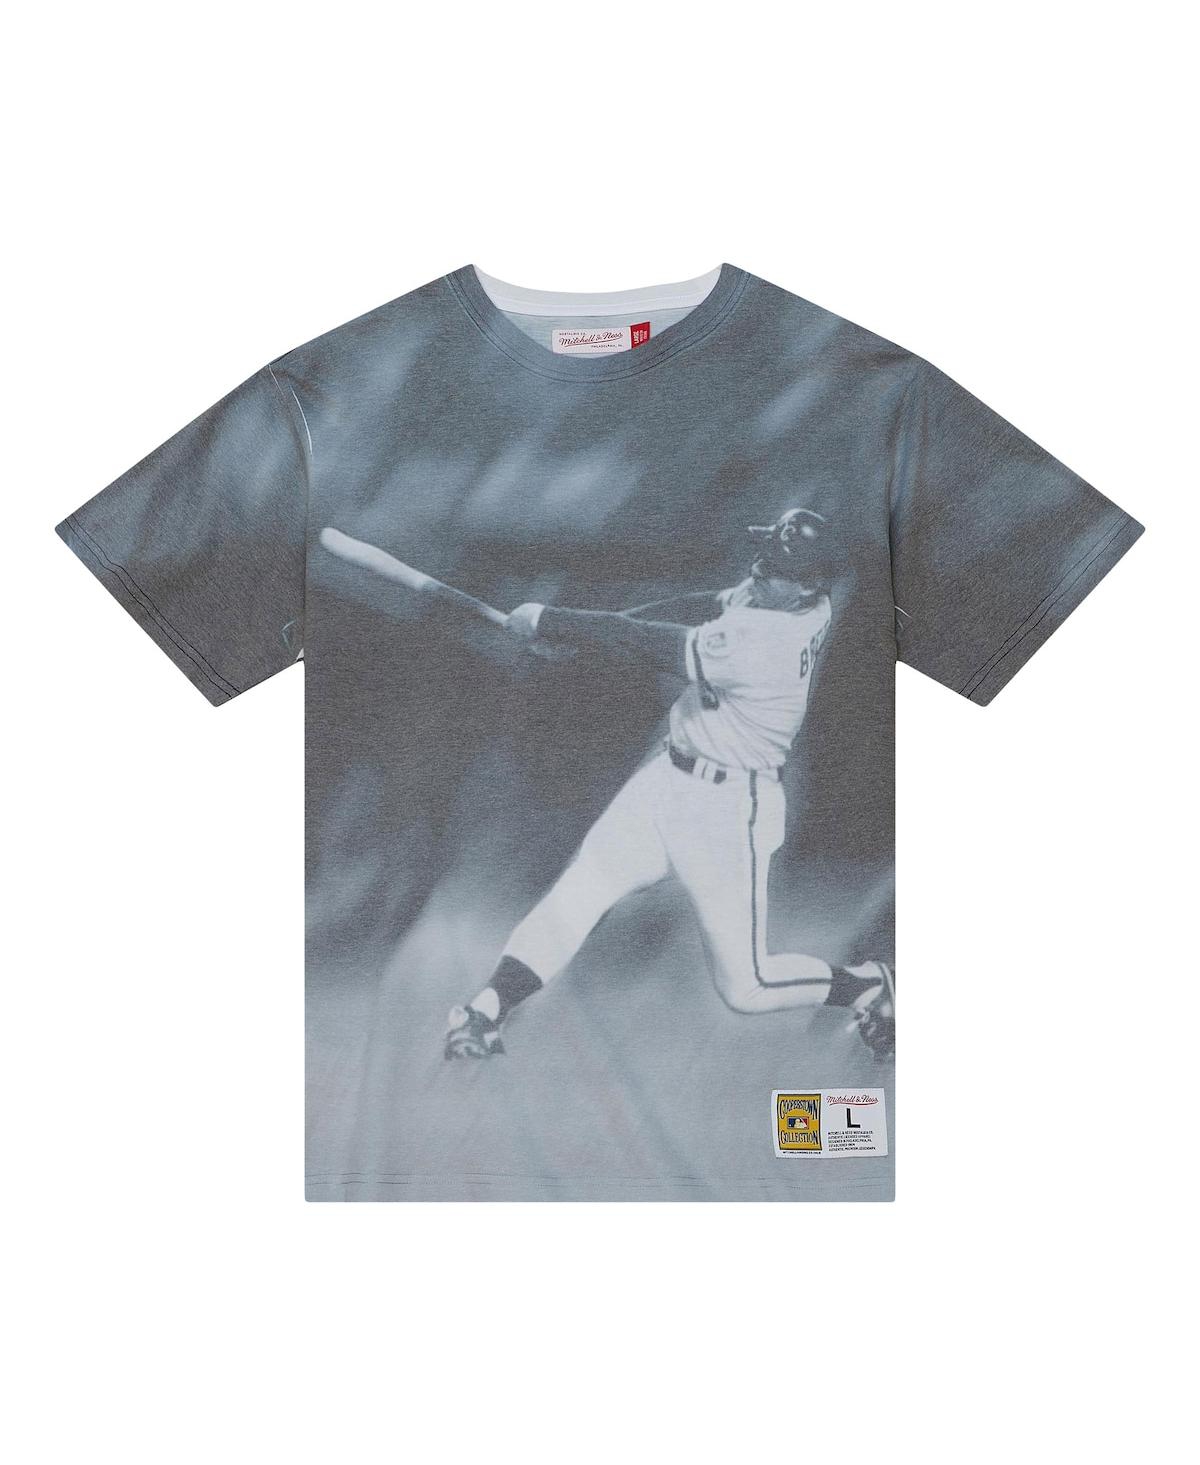 Shop Mitchell & Ness Men's  George Brett Kansas City Royals Cooperstown Collection Highlight Sublimated Pl In White